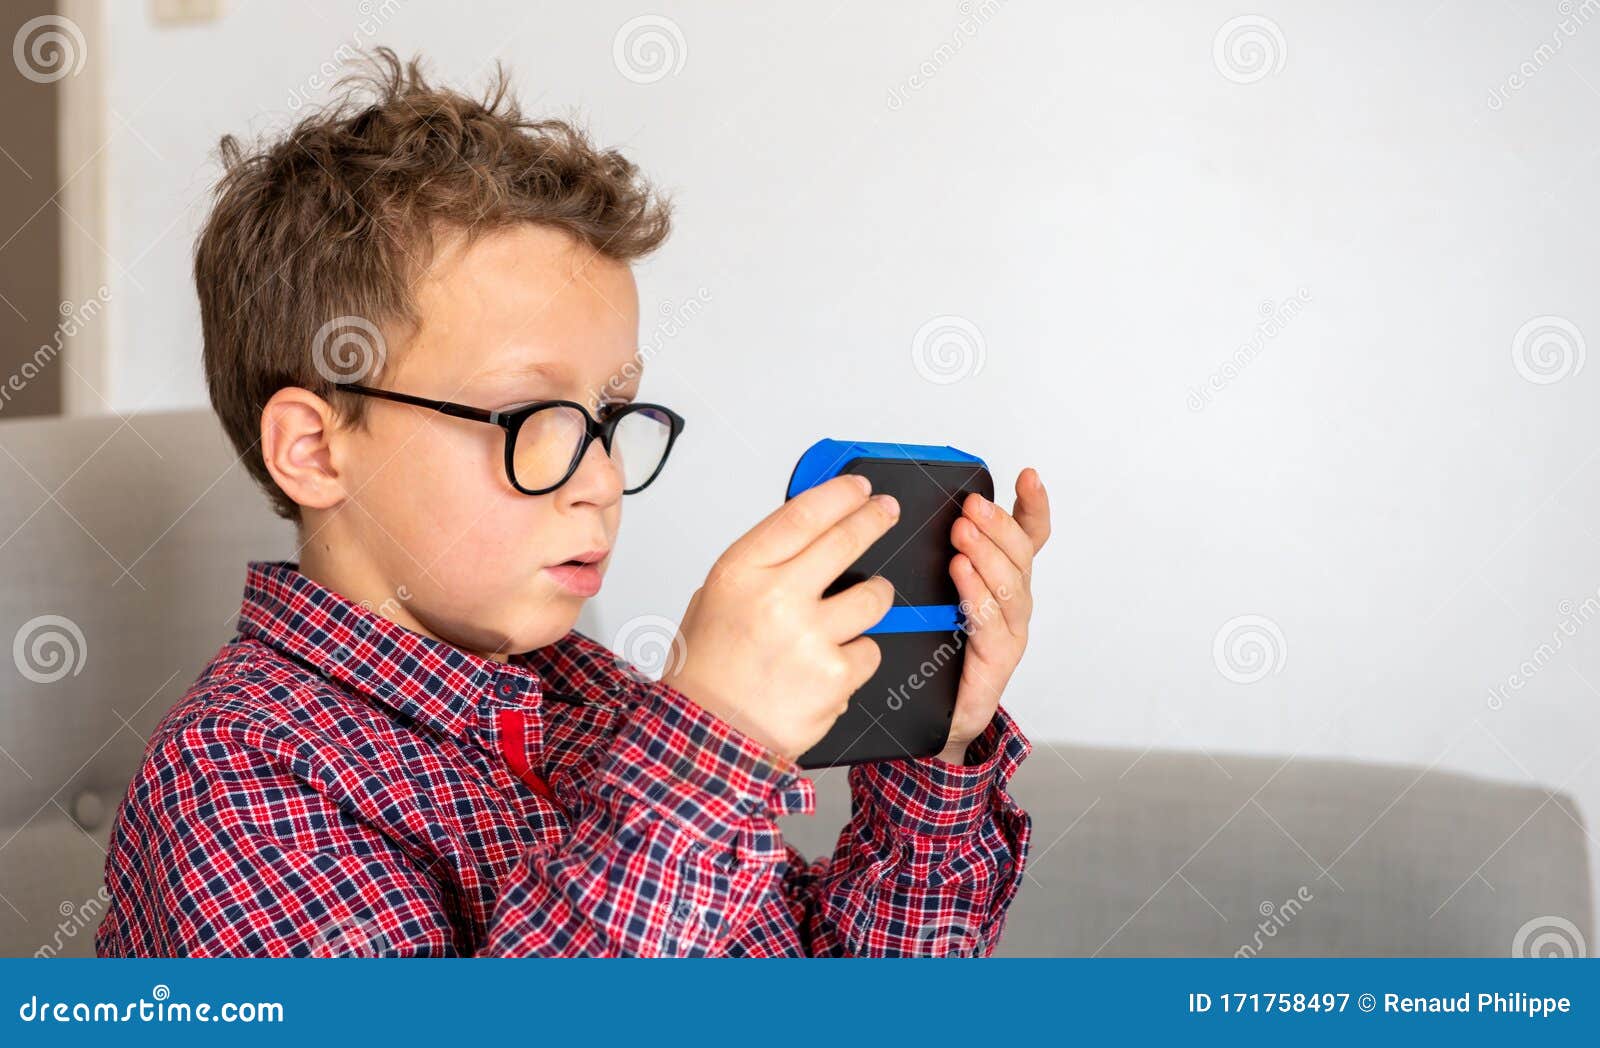 Child Boy Playing Video Game Stock Image Image Of Concentration Play